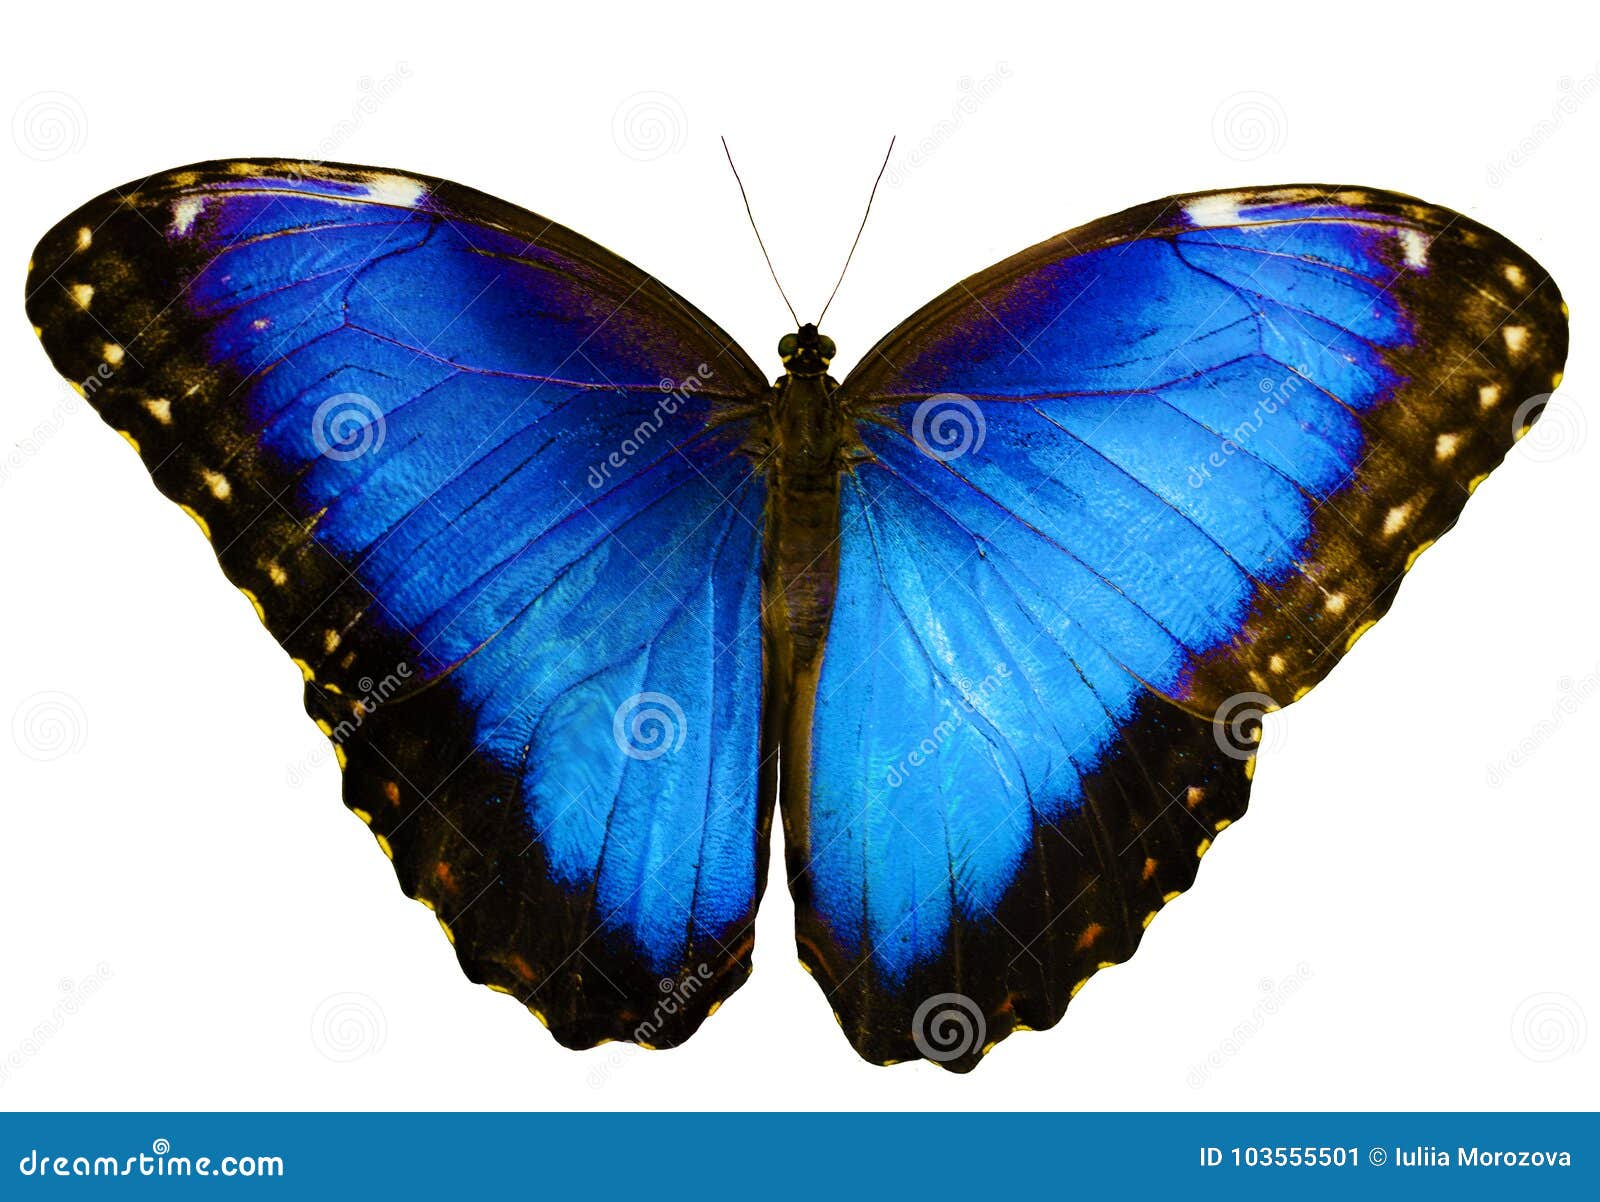 blue morpho butterfly  on white background with spread wings